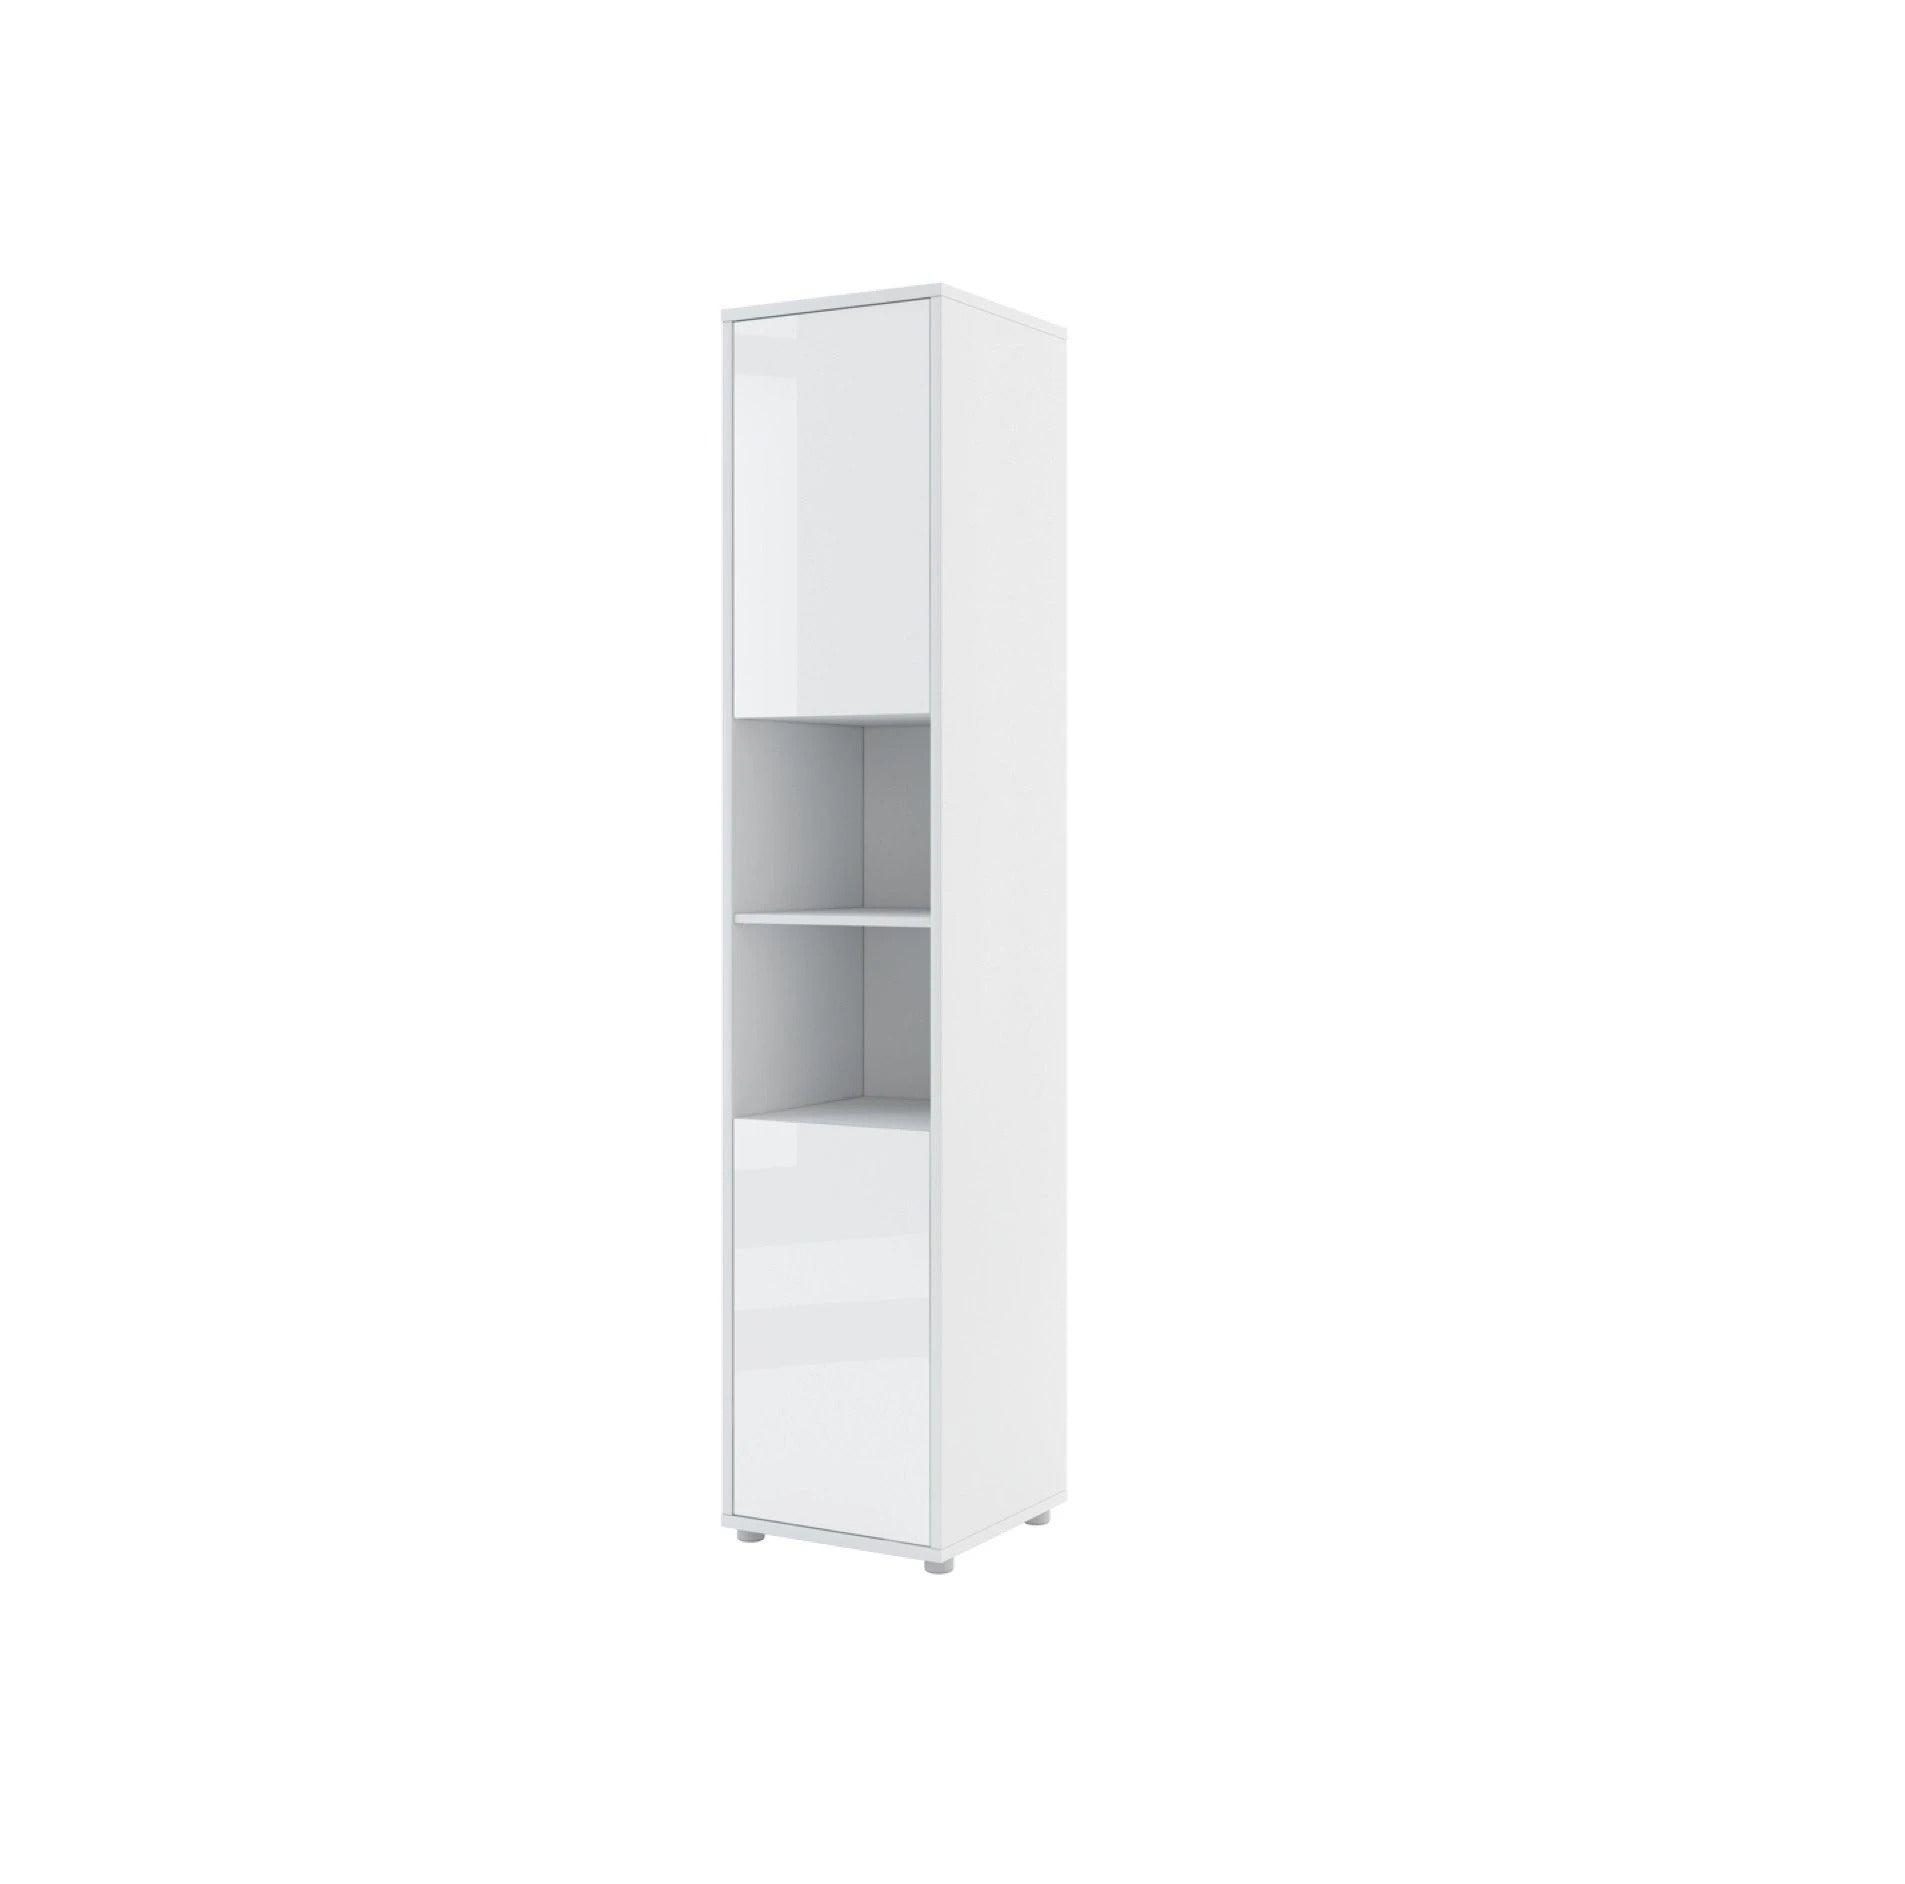 View BC08 Tall Storage Cabinet for Vertical Wall Bed Murphy Bed Concept White Gloss 45cm information